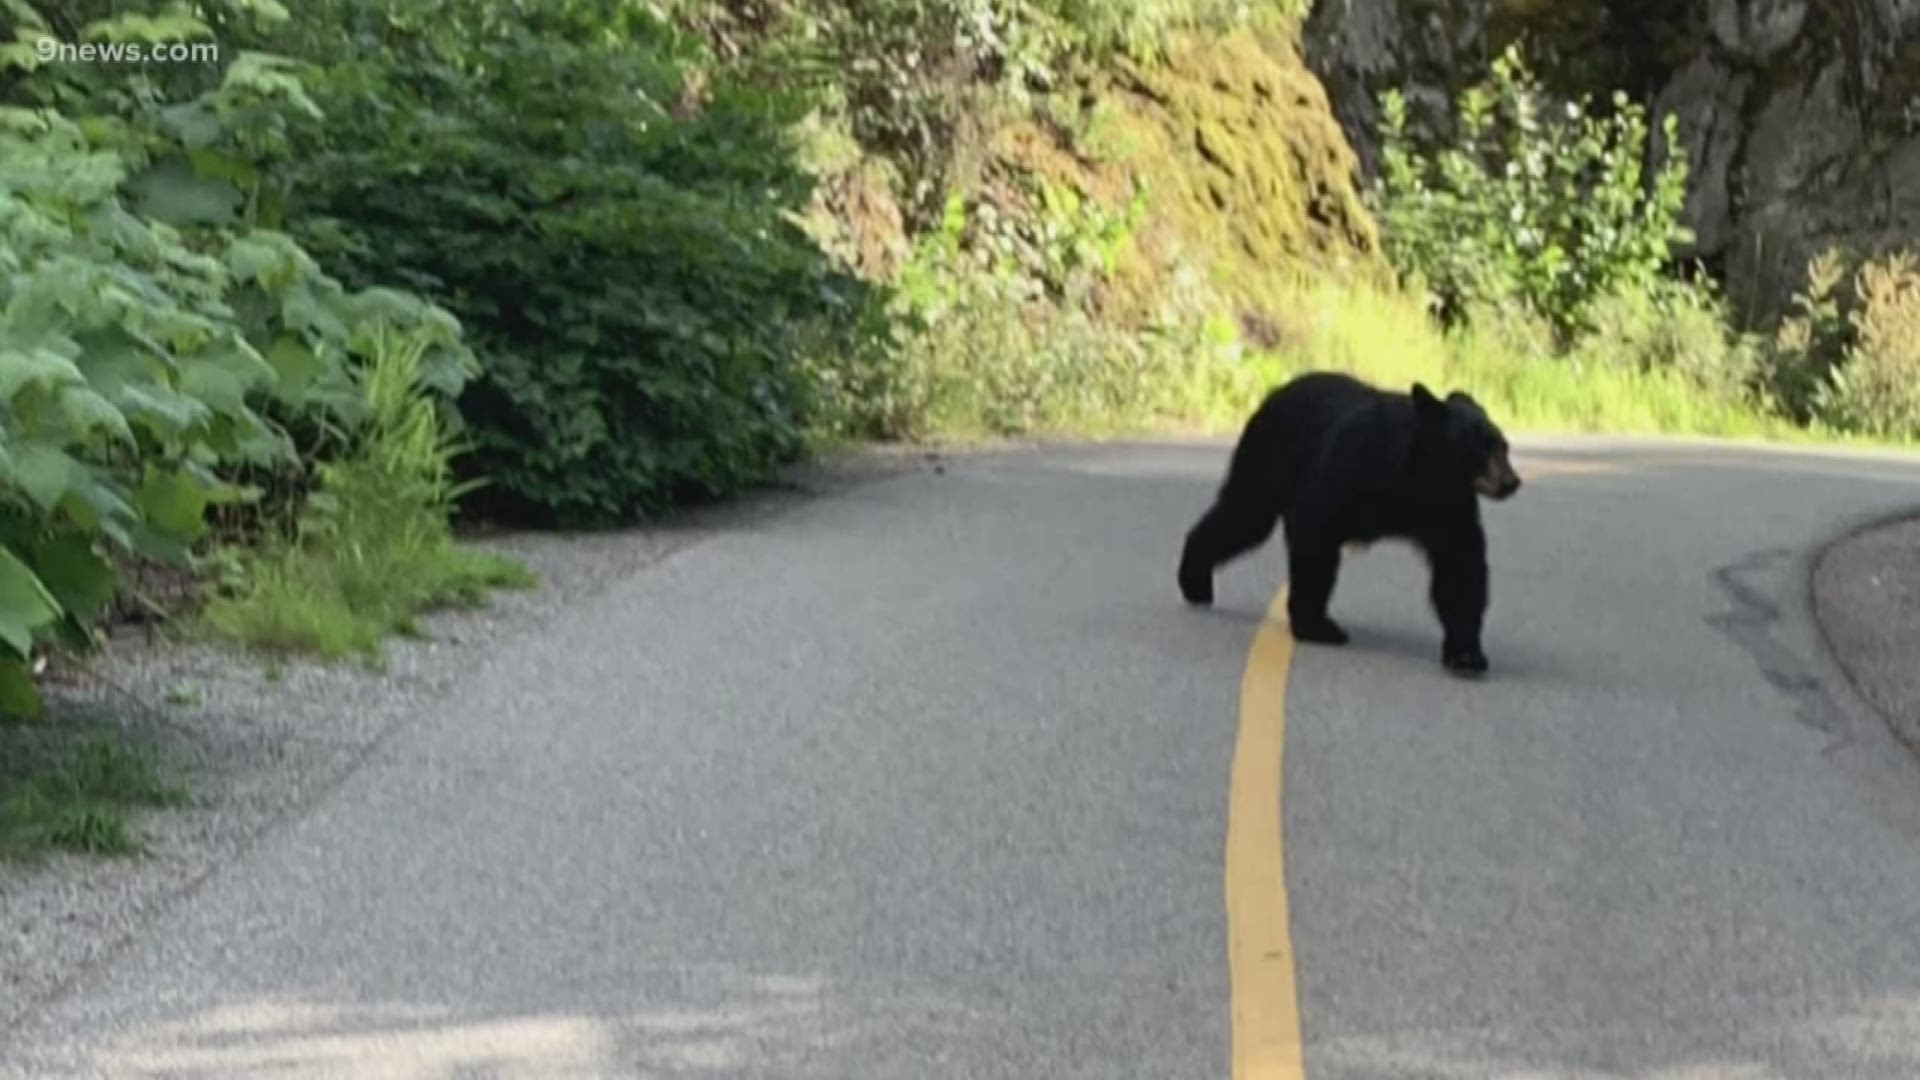 A woman from Denver said she ran for her life after a bear charged her. She stood her ground and got away without a scratch.